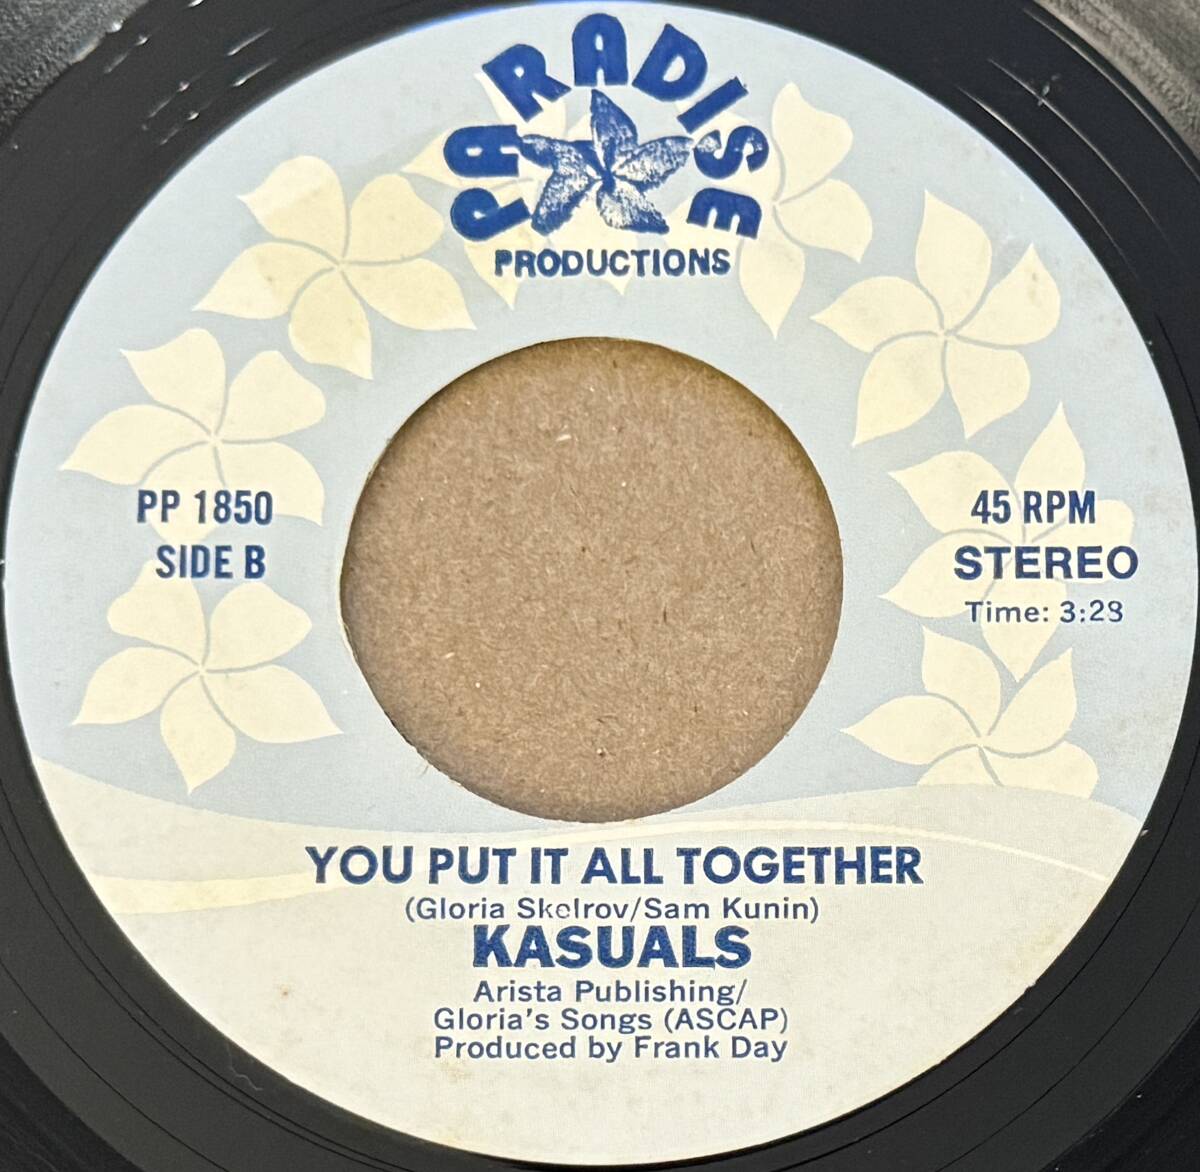 AOR Hawaii 45RPM Mellow Hawaiian Kasuals - The Other Side Of Me/You Put It All Together  ハワイレコードの画像2